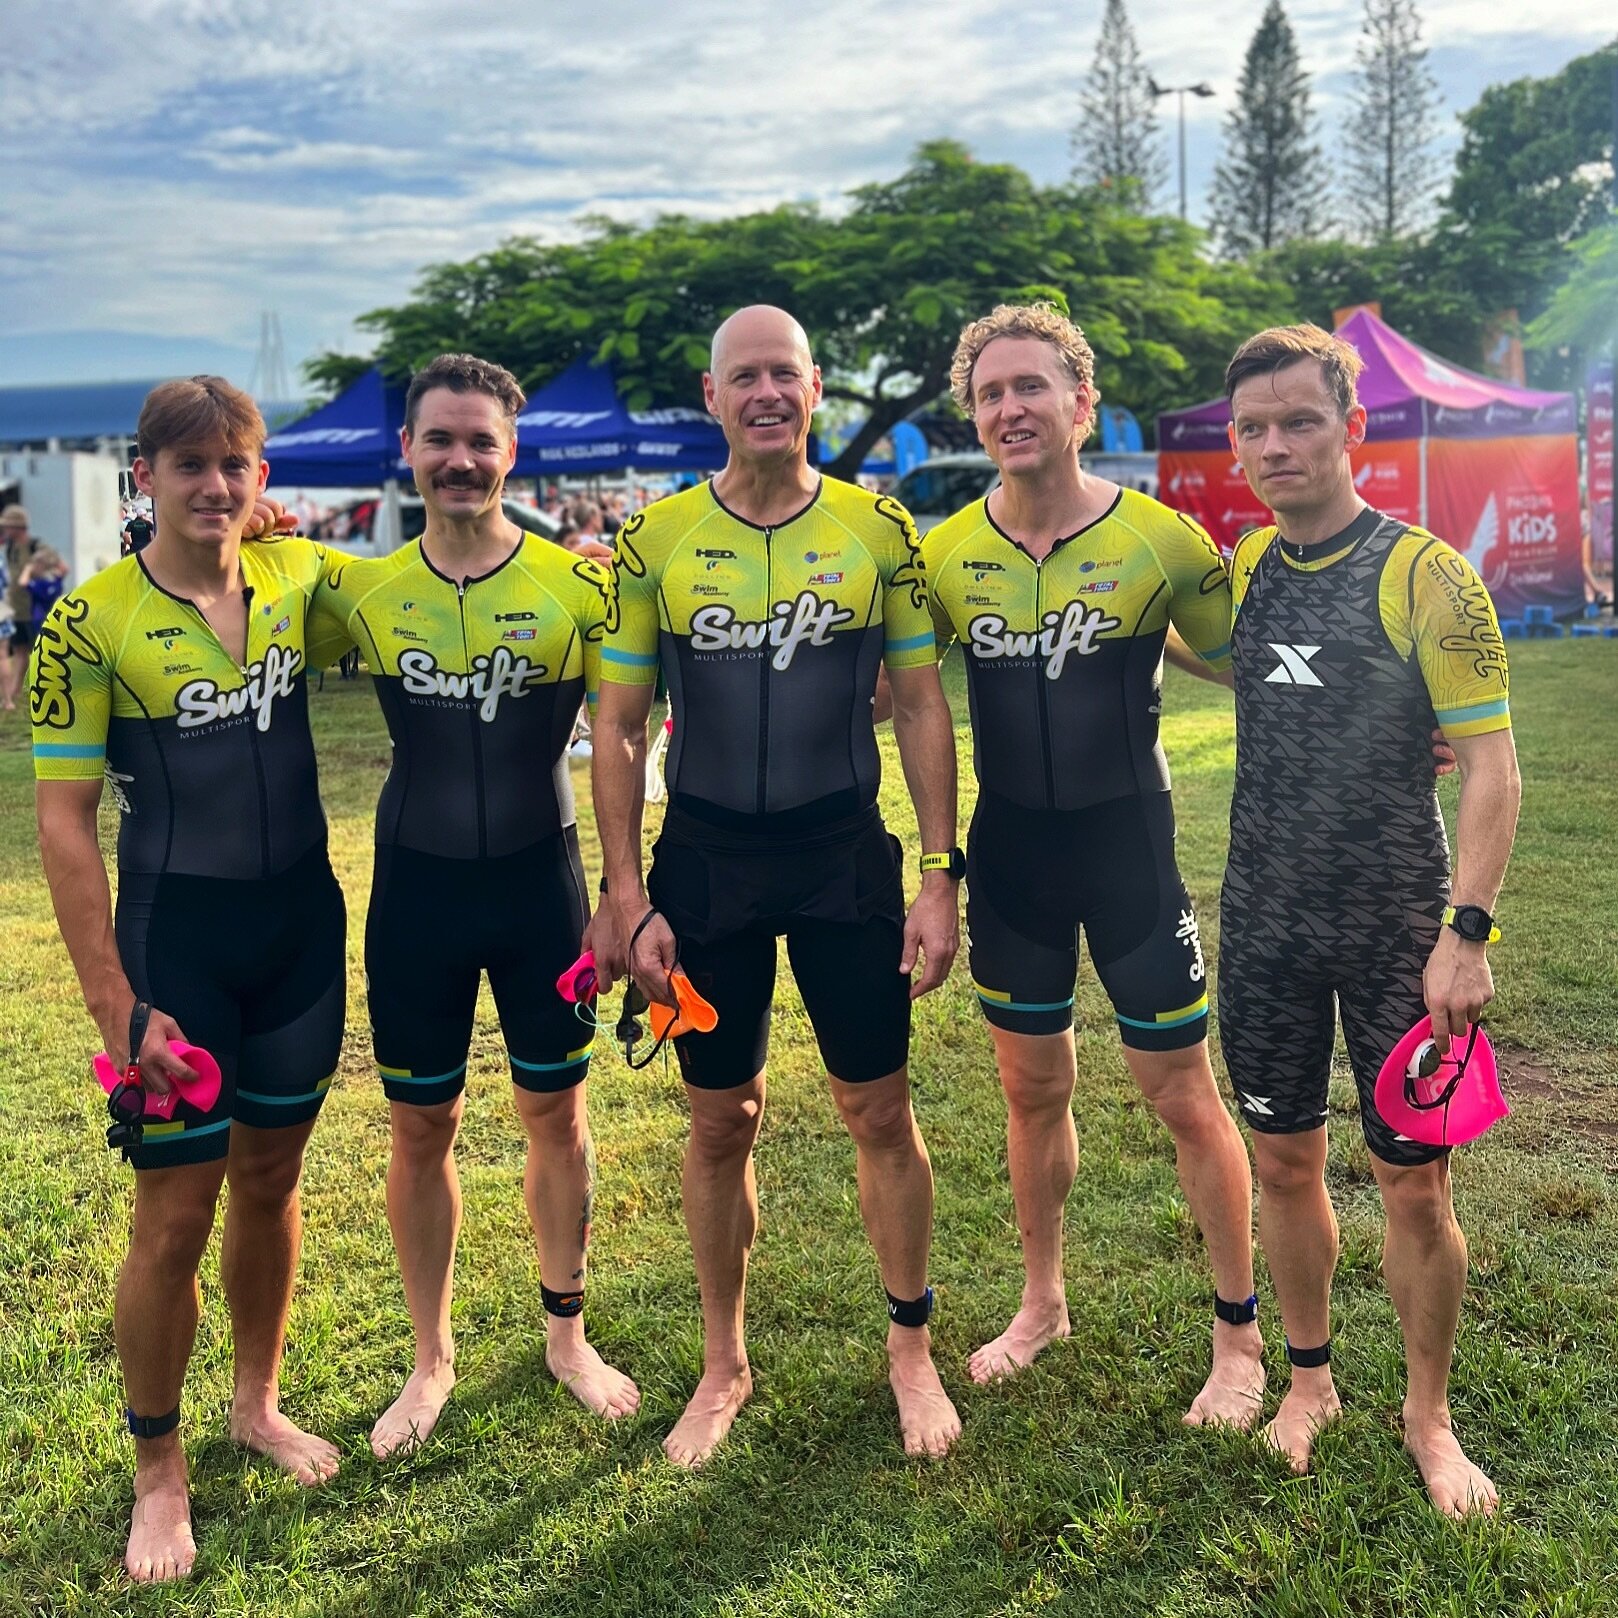 Some fast Short Course racing at #Qtstriseries Raby Bay today and great prep for #mootri next weekend. 
The best training is racing.
#swiftmultisport